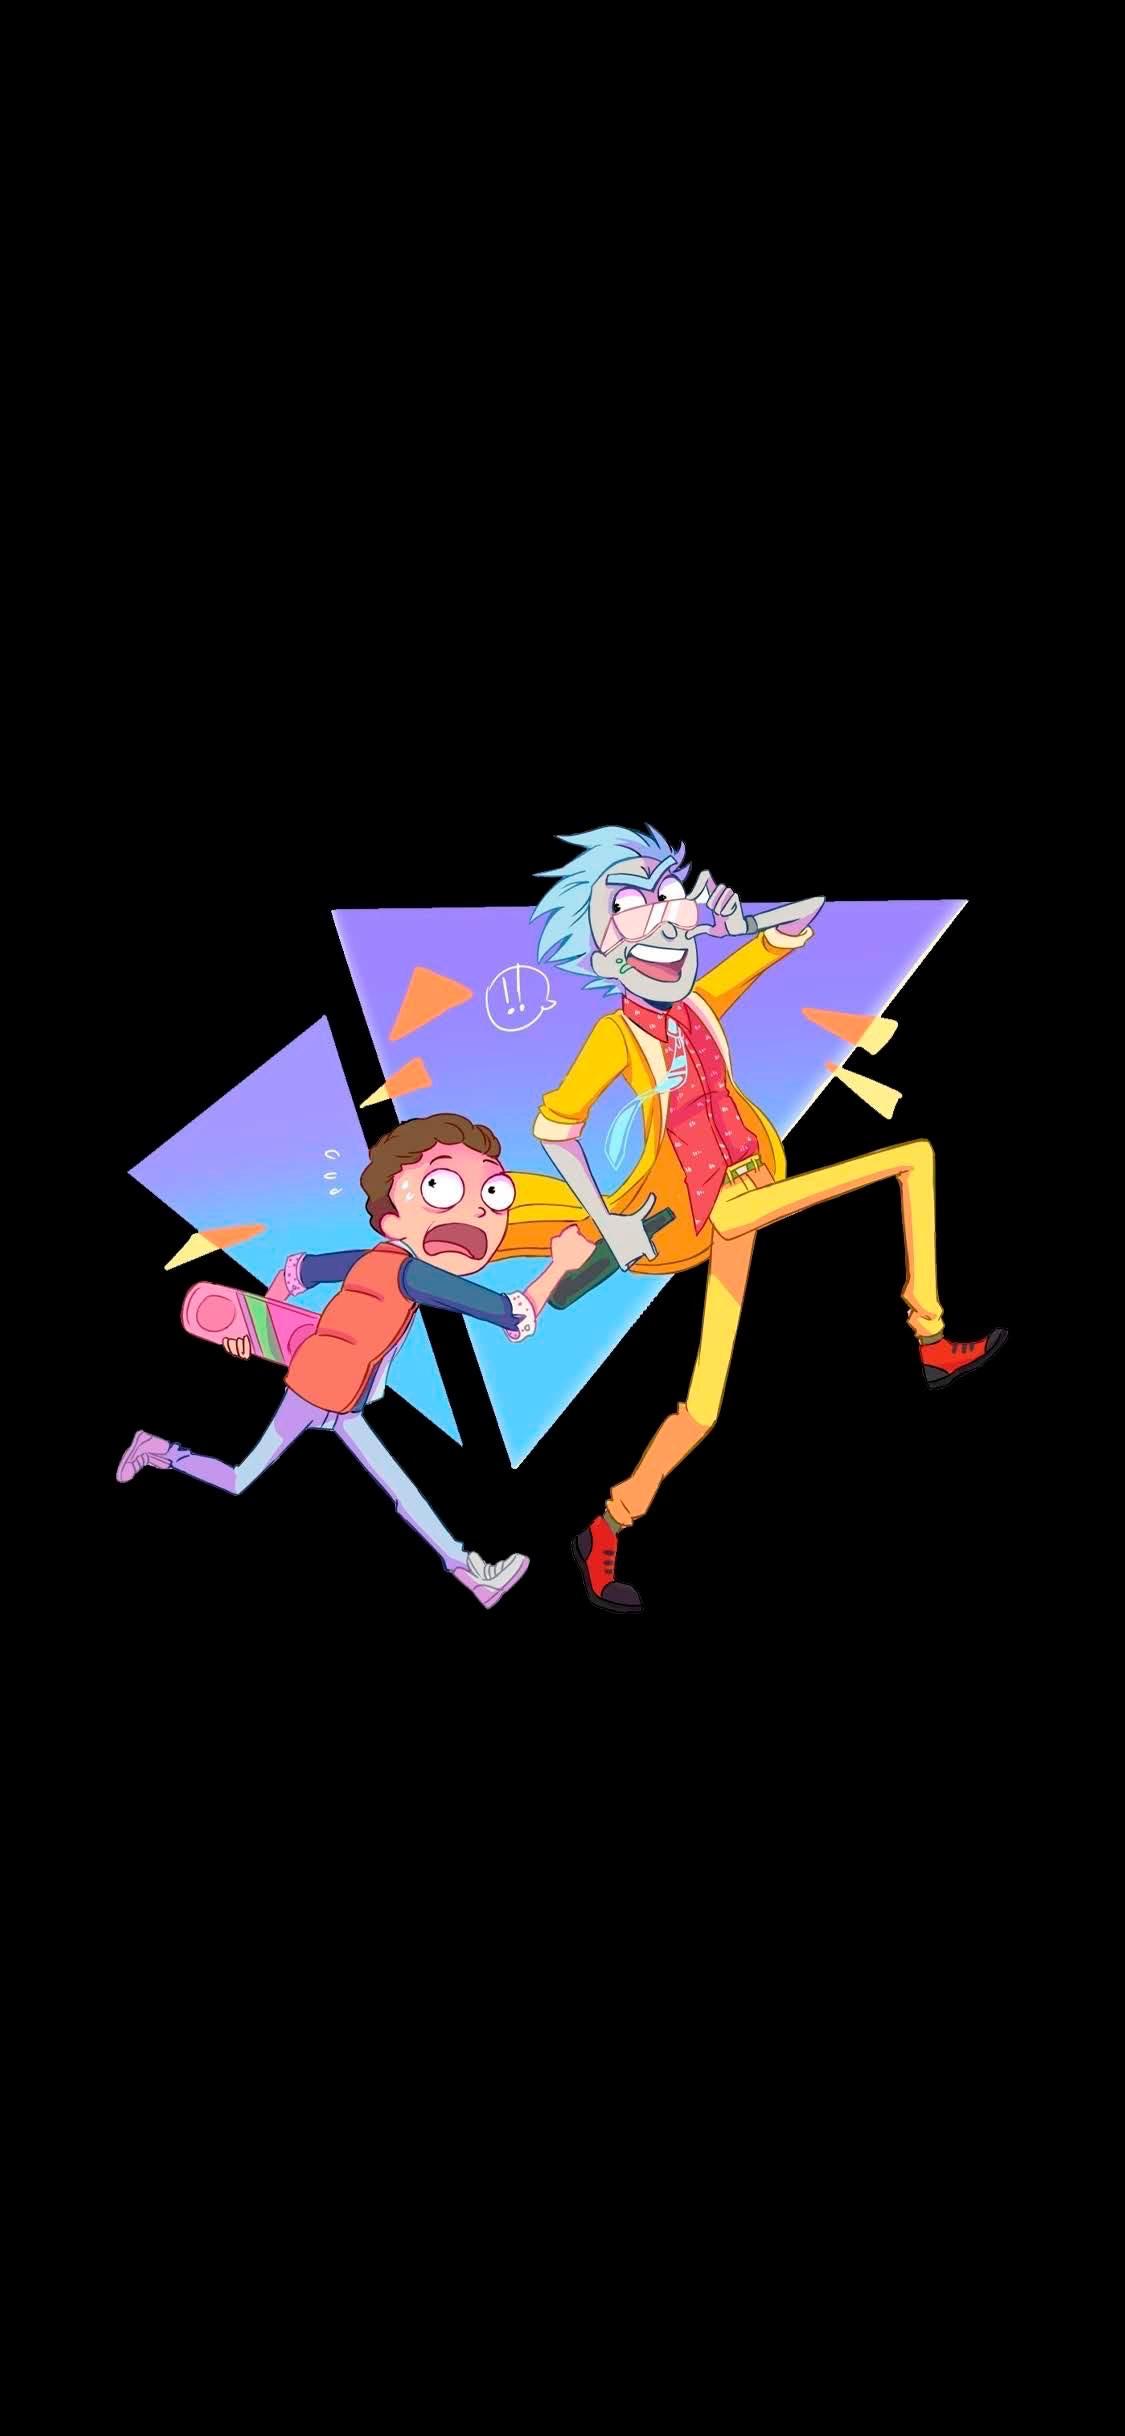 Rick and Morty back to the future wallpaper